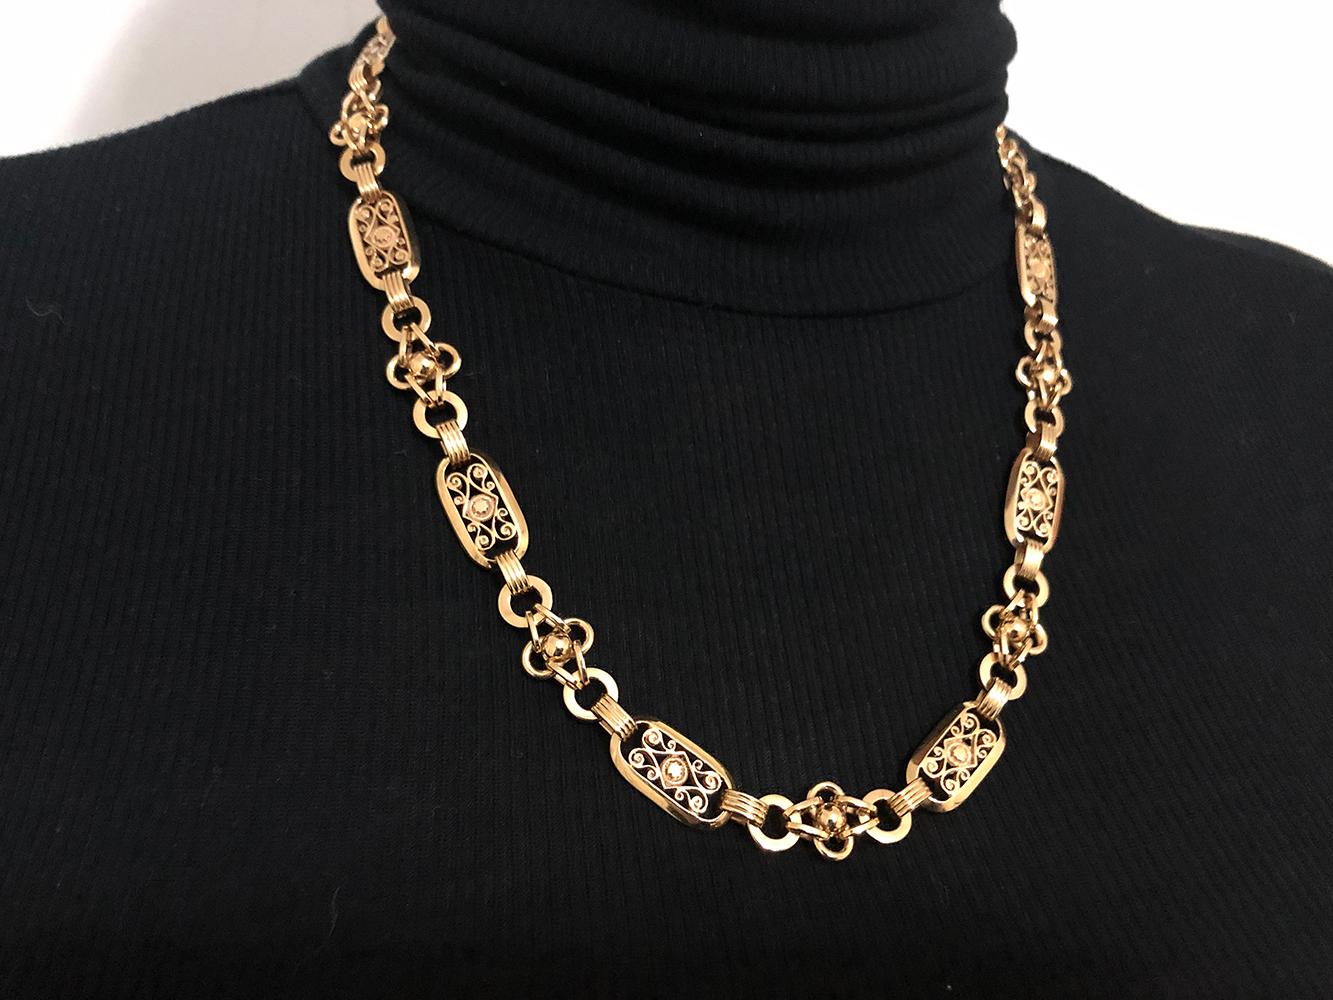 Beautiful antique watch chain.  Distinctive well-detailed open link.  Solid gauge 14K yellow gold.  20 1/2